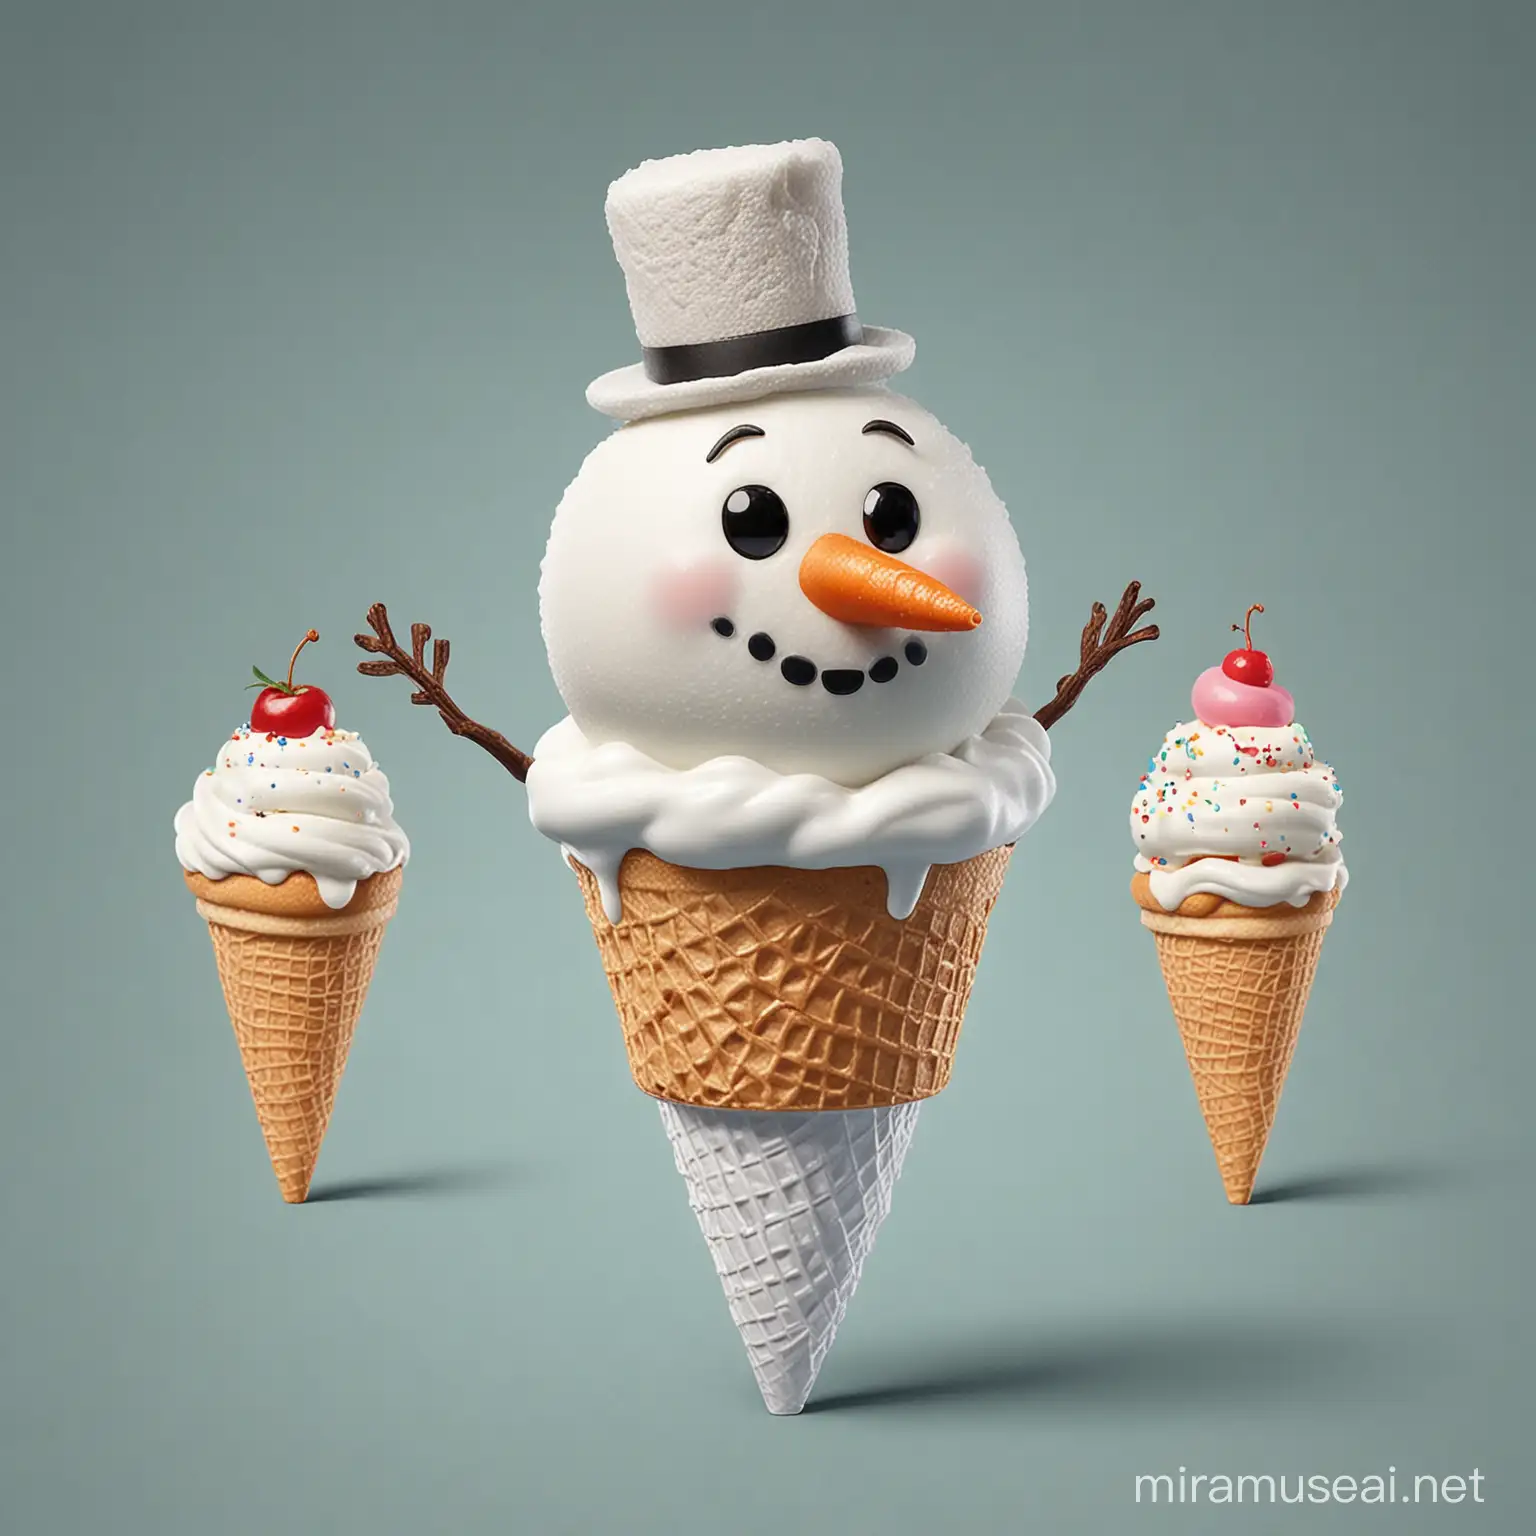 READ ALL AND MAKE SURE YOU HAVE ALL THE ELEMENTS IN YOUR DESIGN SUBMISSION. BUSINESS NAME MUST BE EXACTLY HOW IT IS BELOW.
I'm looking for a skilled graphic designer to help me create a logo. The design should be attractive, engaging, and accurately reflect my brand. The logo is for a soft serve ice cream shop. The design MUST have a cartoon snowman, a soft serve ice cream cone, and font that looks like ice. Not looking for a stick drawing. Snowman should look like something that popped out of a cartoon and should be unique. Design should be more 3D, not flat. Should not look like clip art. DO NOT use AI generator. Snowman is going to be a character that we use throughout our branding. Think of McDonald’s, Chuck E. Cheese etc. type characters. So needs to be the whole body of the snowman, not just a snowman head. Snowman and ice cream etc. should look like they are placed for a purpose, not just thrown on there. MUST be original. Do not copy other designs. If your image looks close to other images submitted then you are either copying or using AI generator, and your submission will be rejected. MUST have full name of our business: Chill - Out Tasty Treats